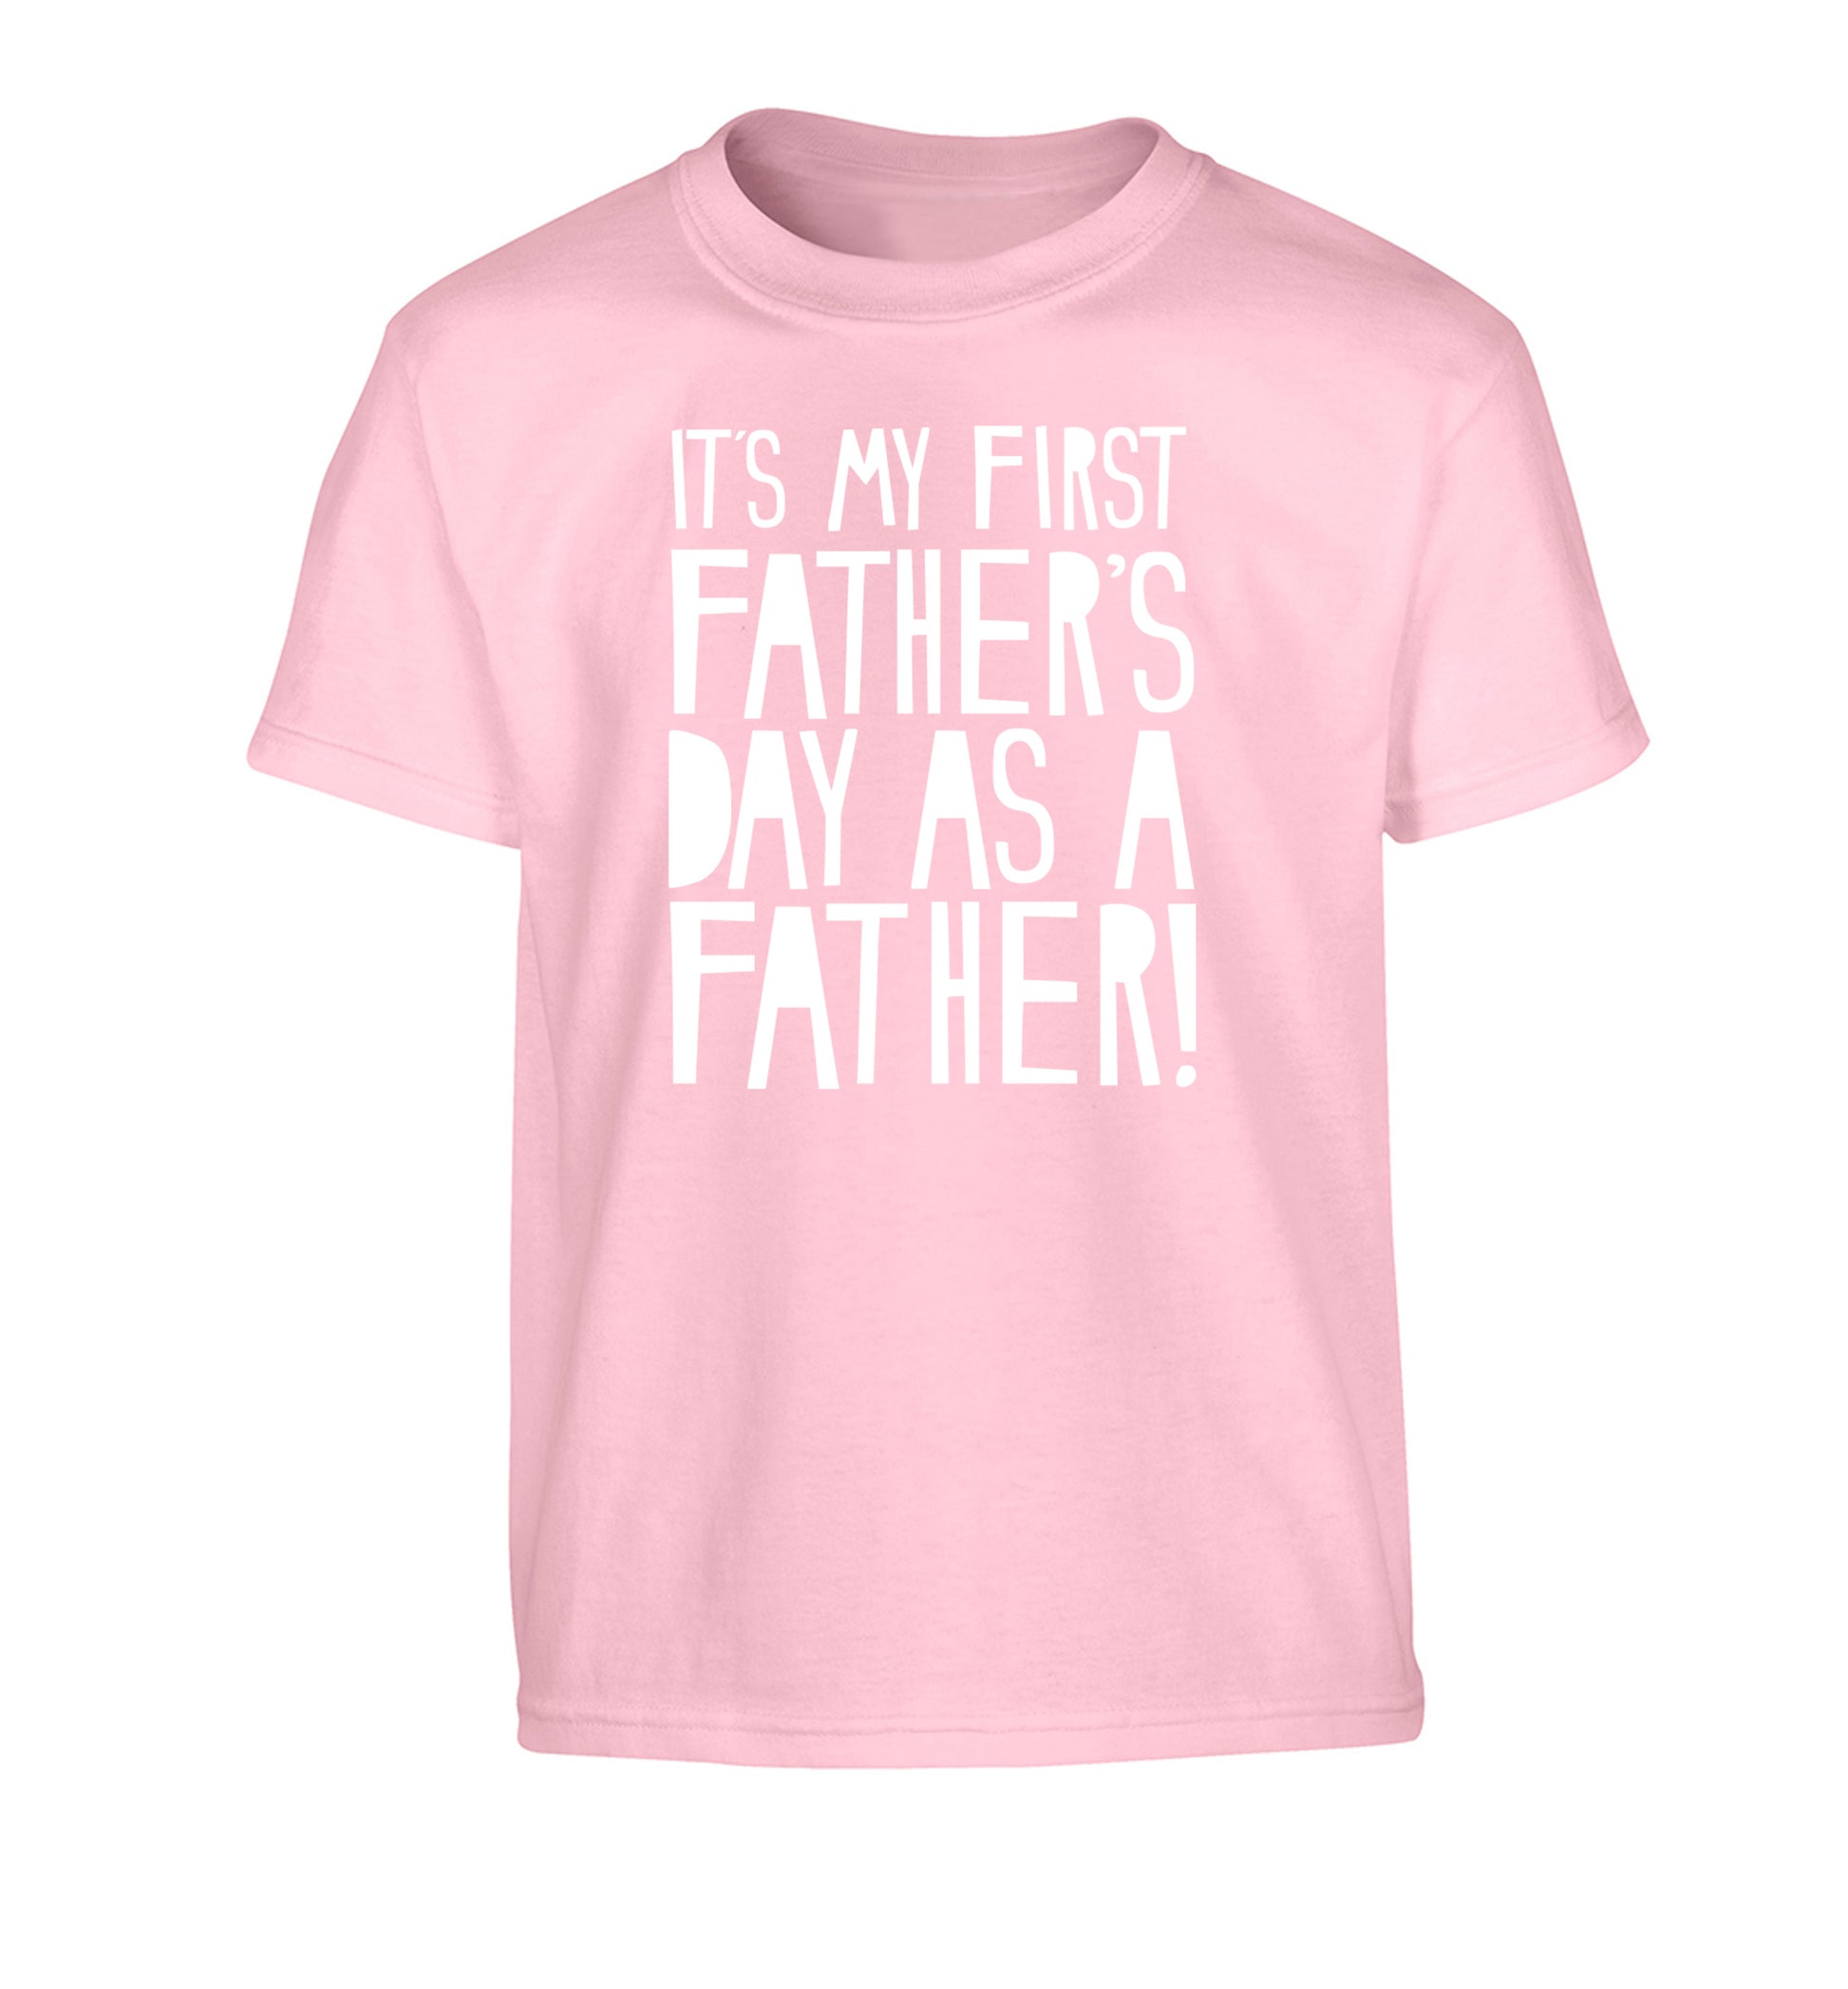 It's my first Father's Day as a father! Children's light pink Tshirt 12-13 Years